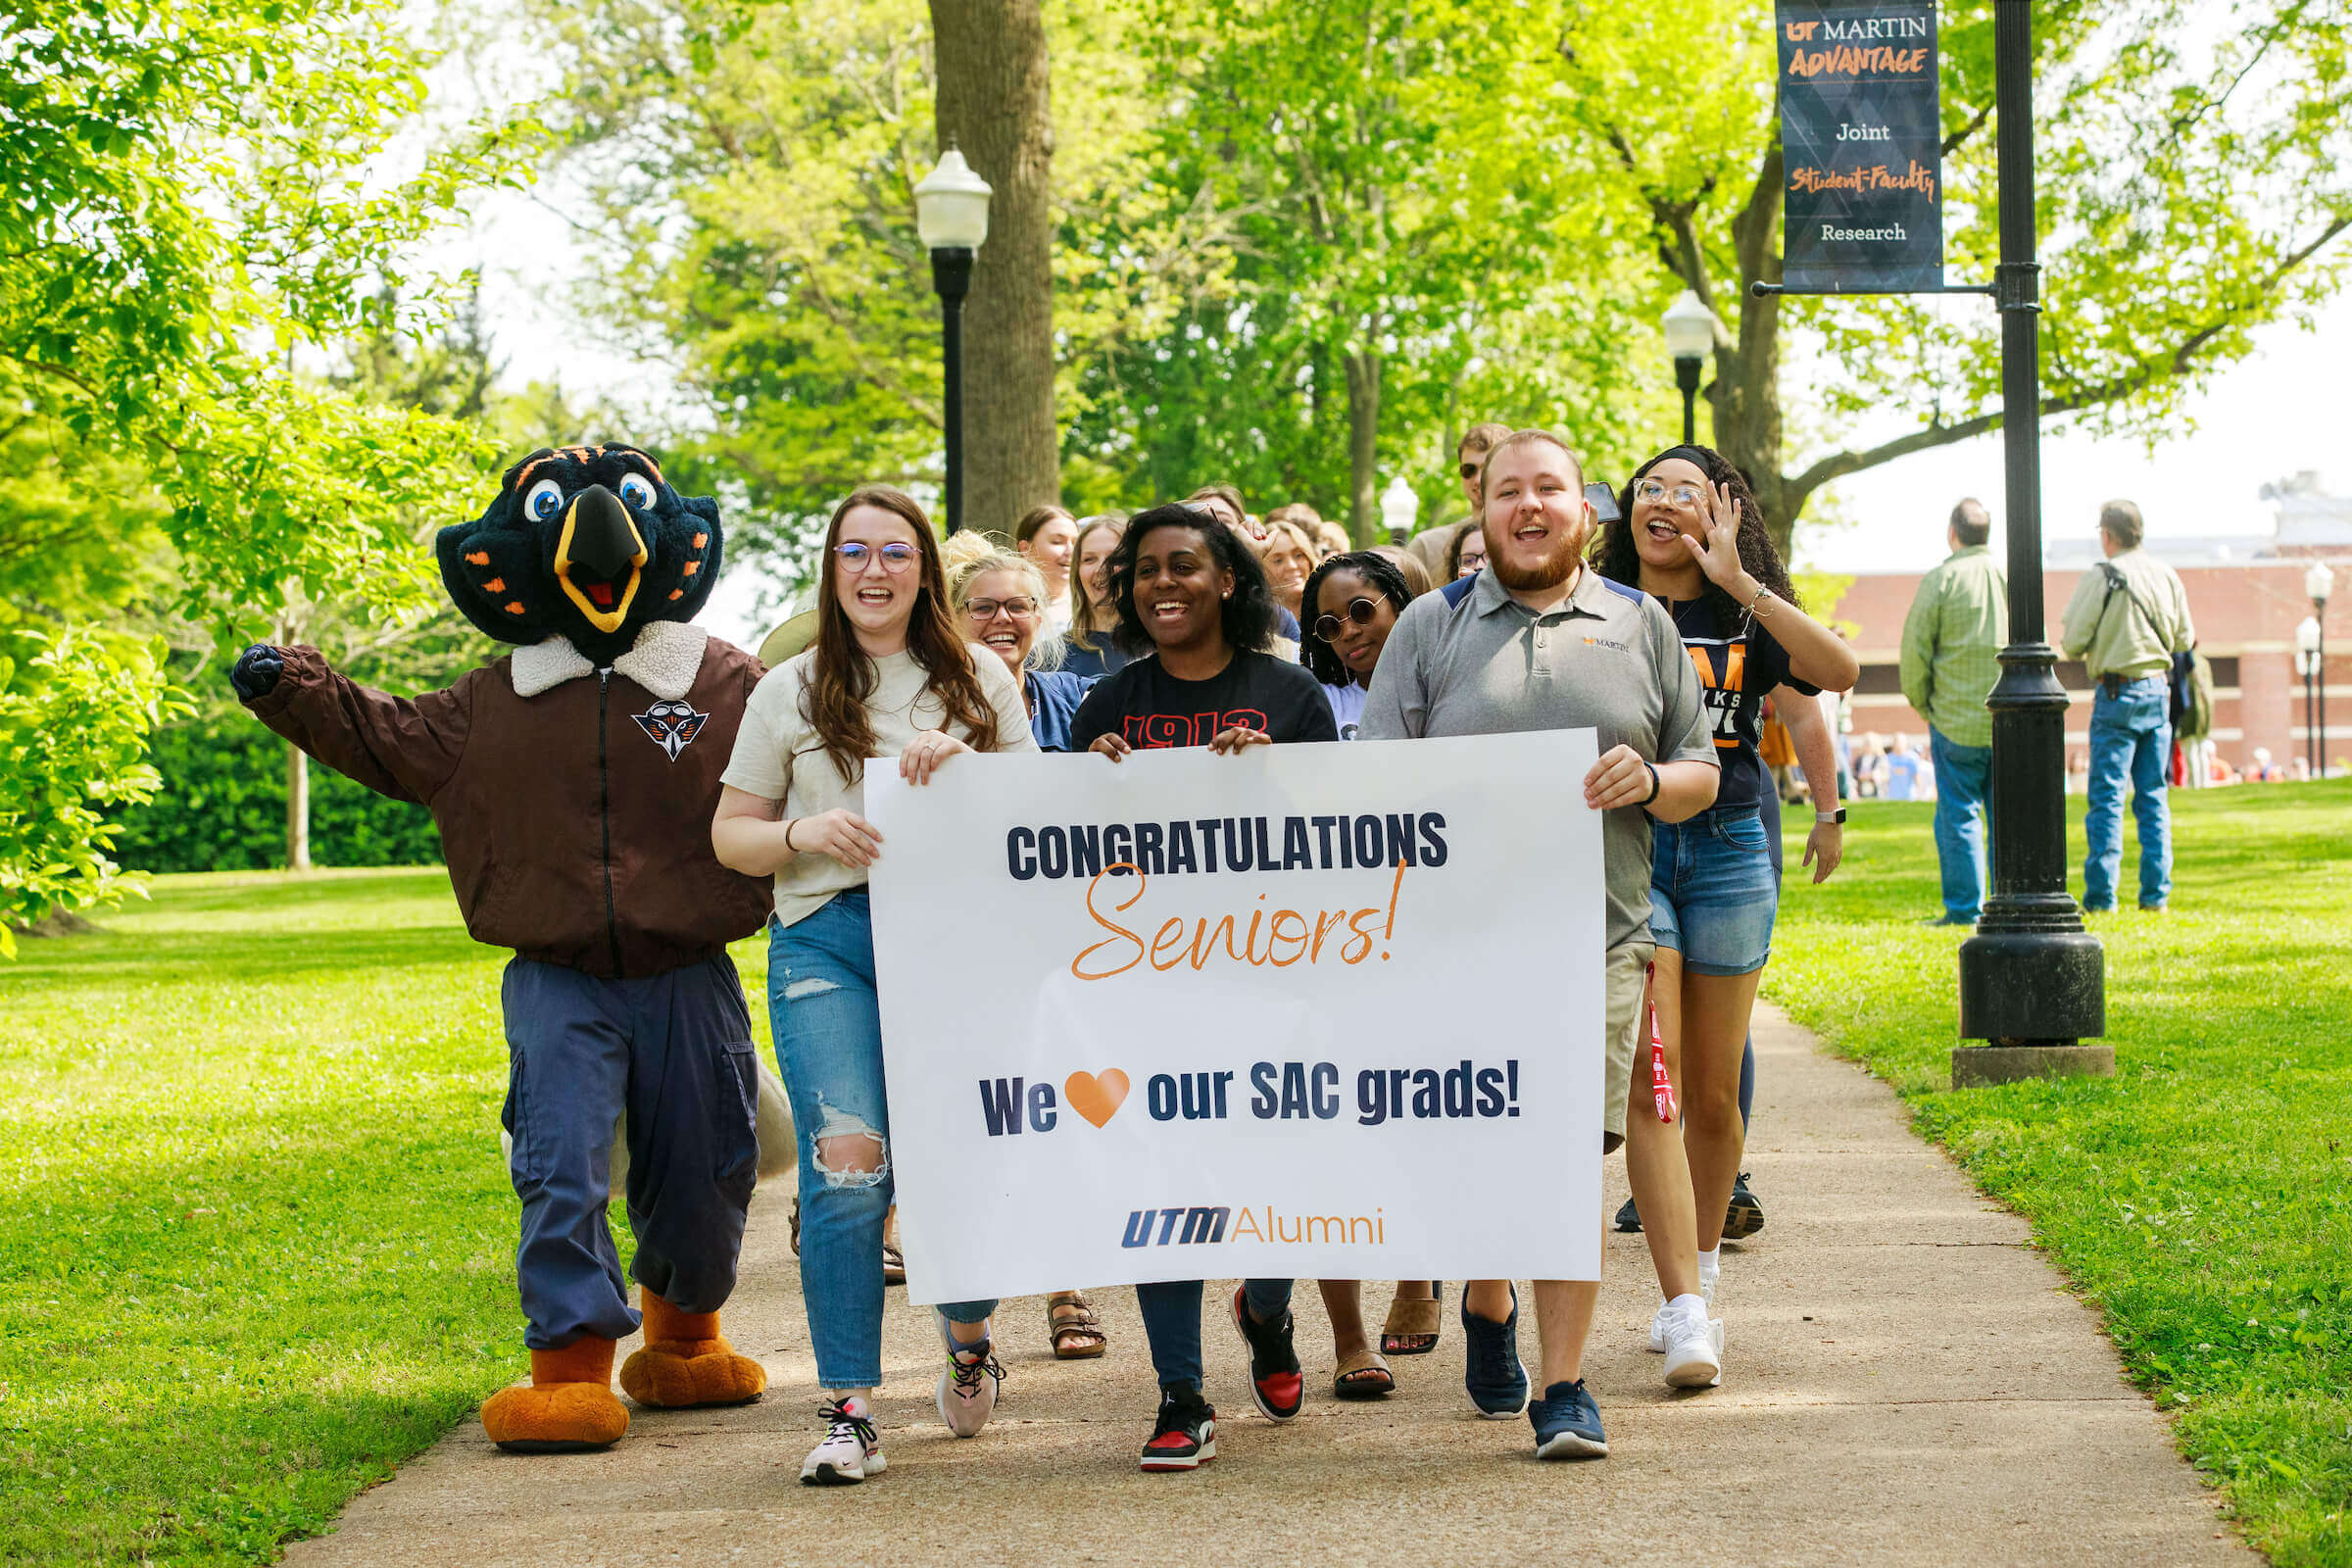 Captain Skyhawk joins a procession of soon-to-be graduates during our annual UTM Senior Walk.